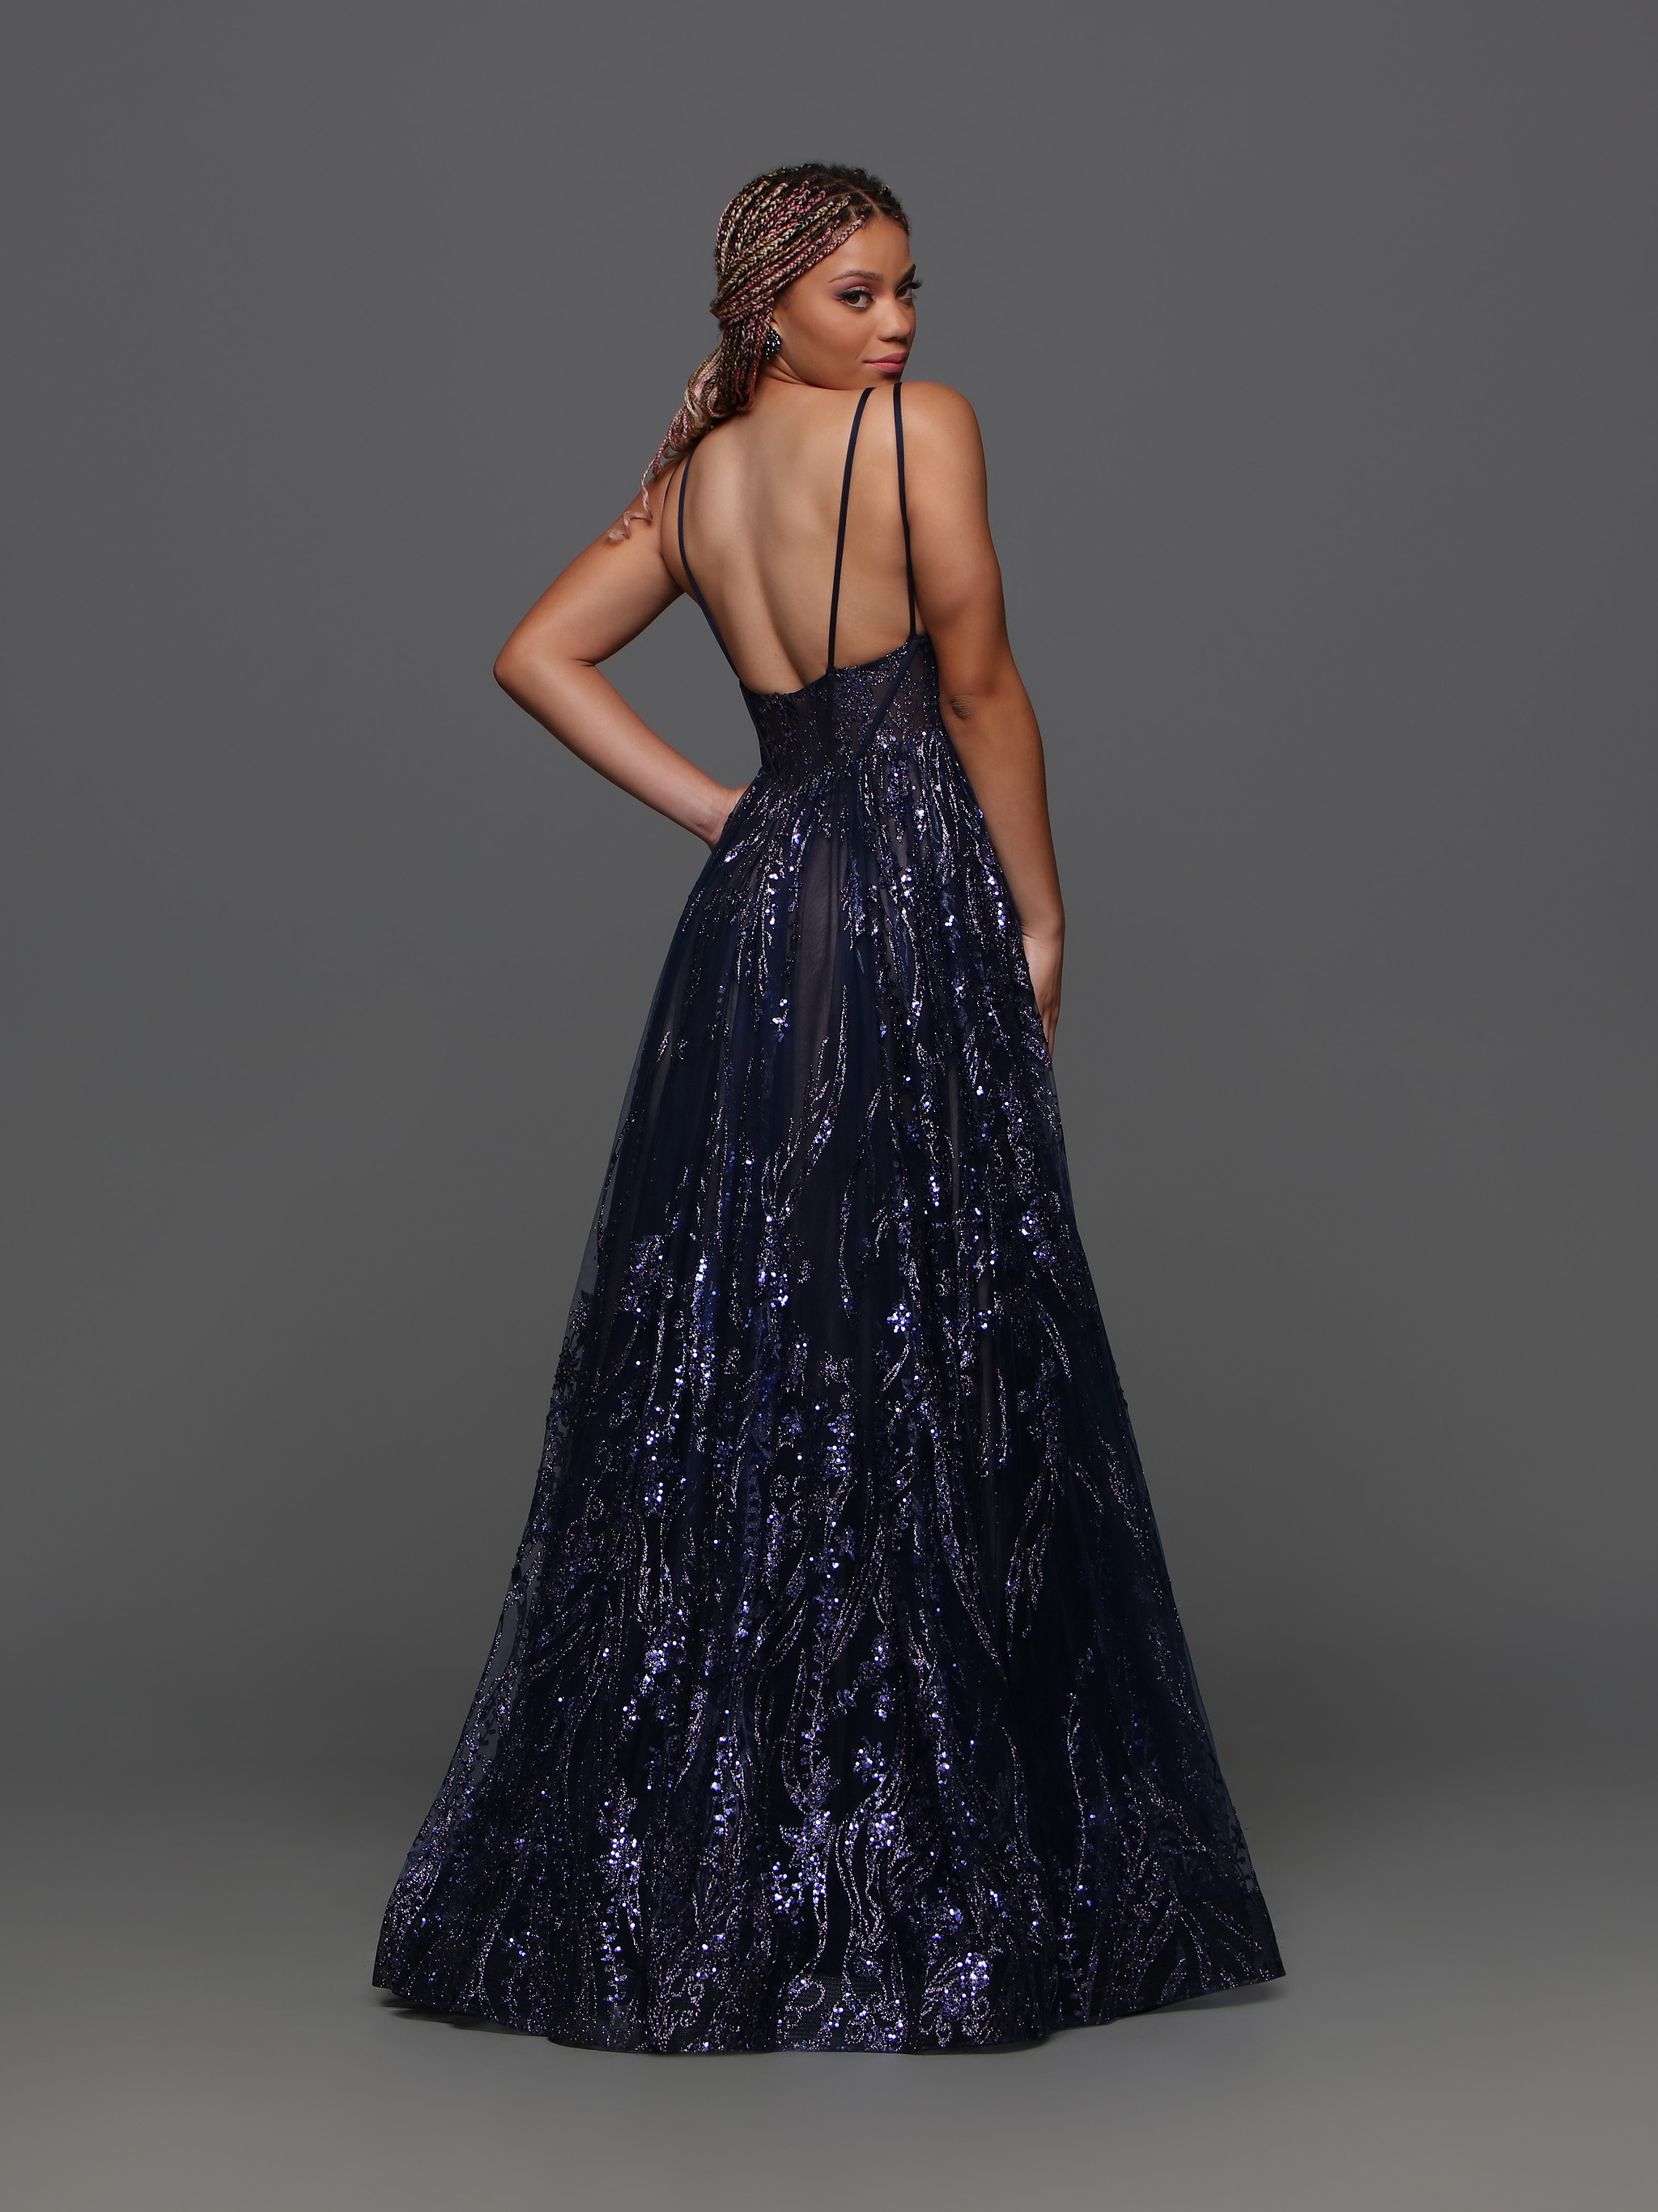 Image showing back view of style #72329